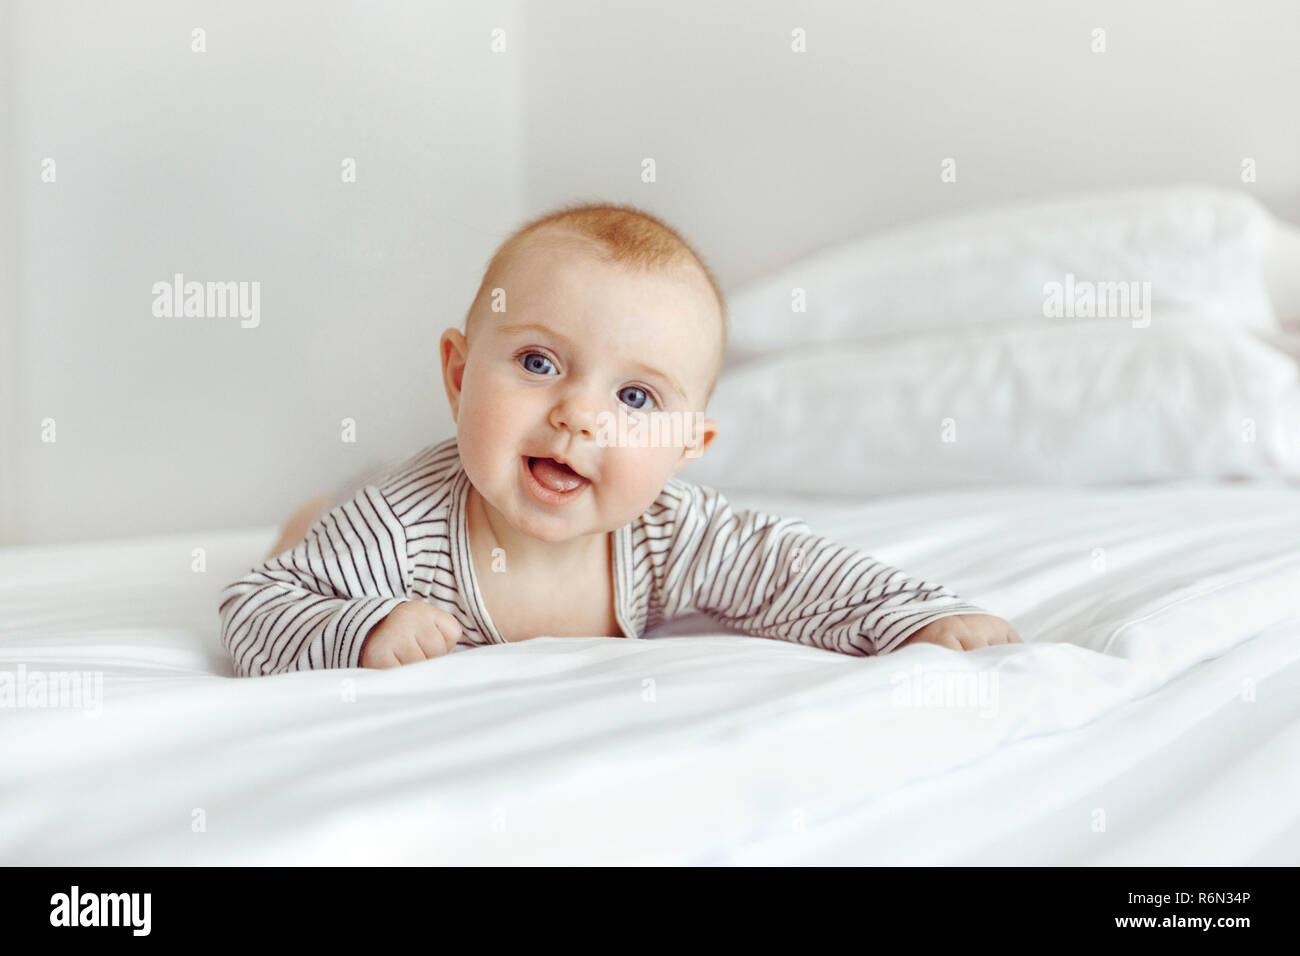 Charming happy baby on white bed Stock Photo